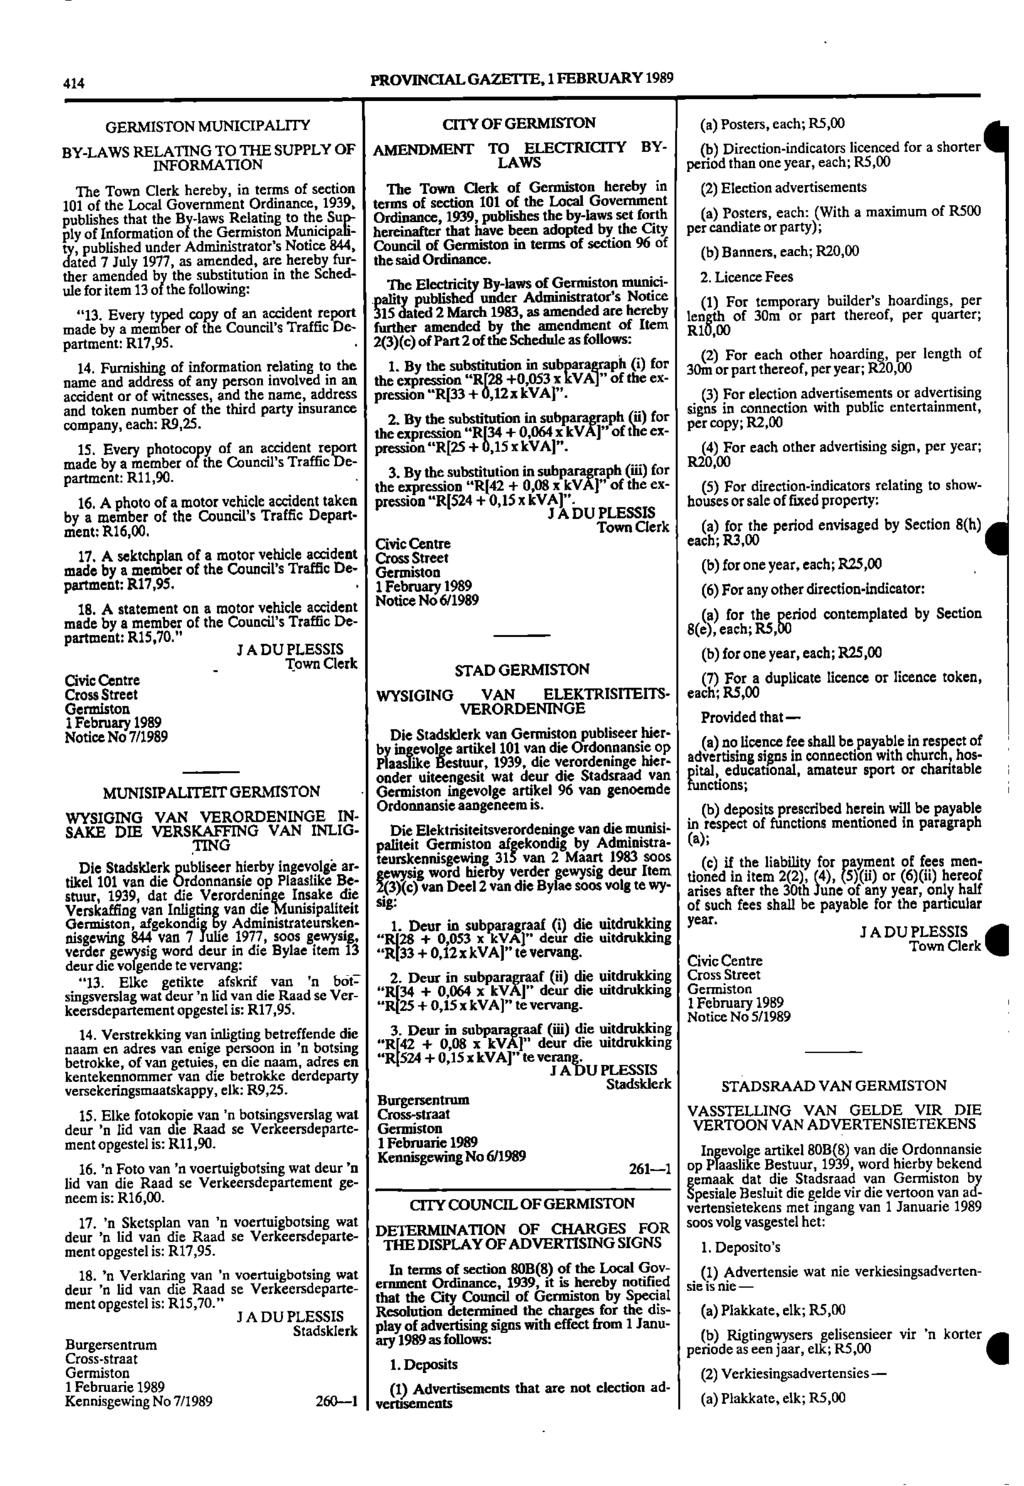 414 PROVINCIAL GAZETTE, 1 FEBRUARY 1989 GERMISTON MUNICIPALITY CITY OF GERMISTON (a) Posters, each; 85,00 BY-LAWS RELATING TO THE SUPPLY OF AMENDMENT TO ELECTRICITY BY- (b) Direction - indicators